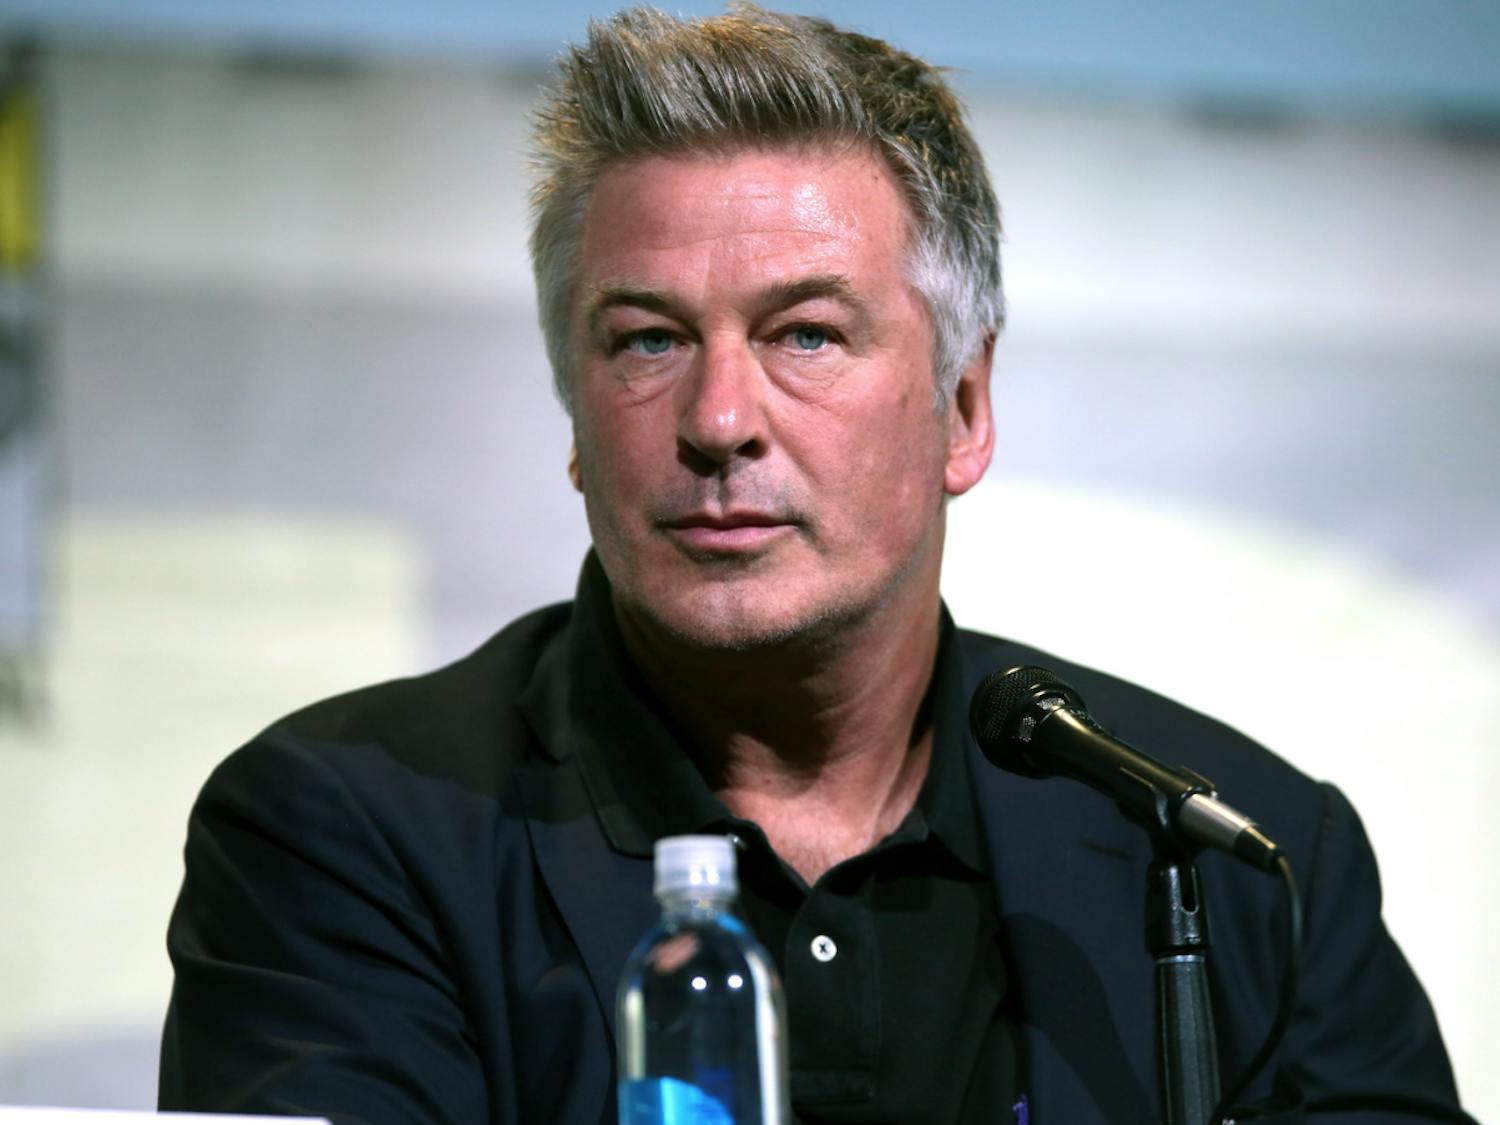 On Jan. 19, prosecutors announced that Baldwin is to be charged with involuntary manslaughter, along with the film’s armorer, Hannah Gutierrez-Reed (Photo courtesy of Flickr/ “Alec Baldwin” by Gage Skidmore. July 21, 2016).